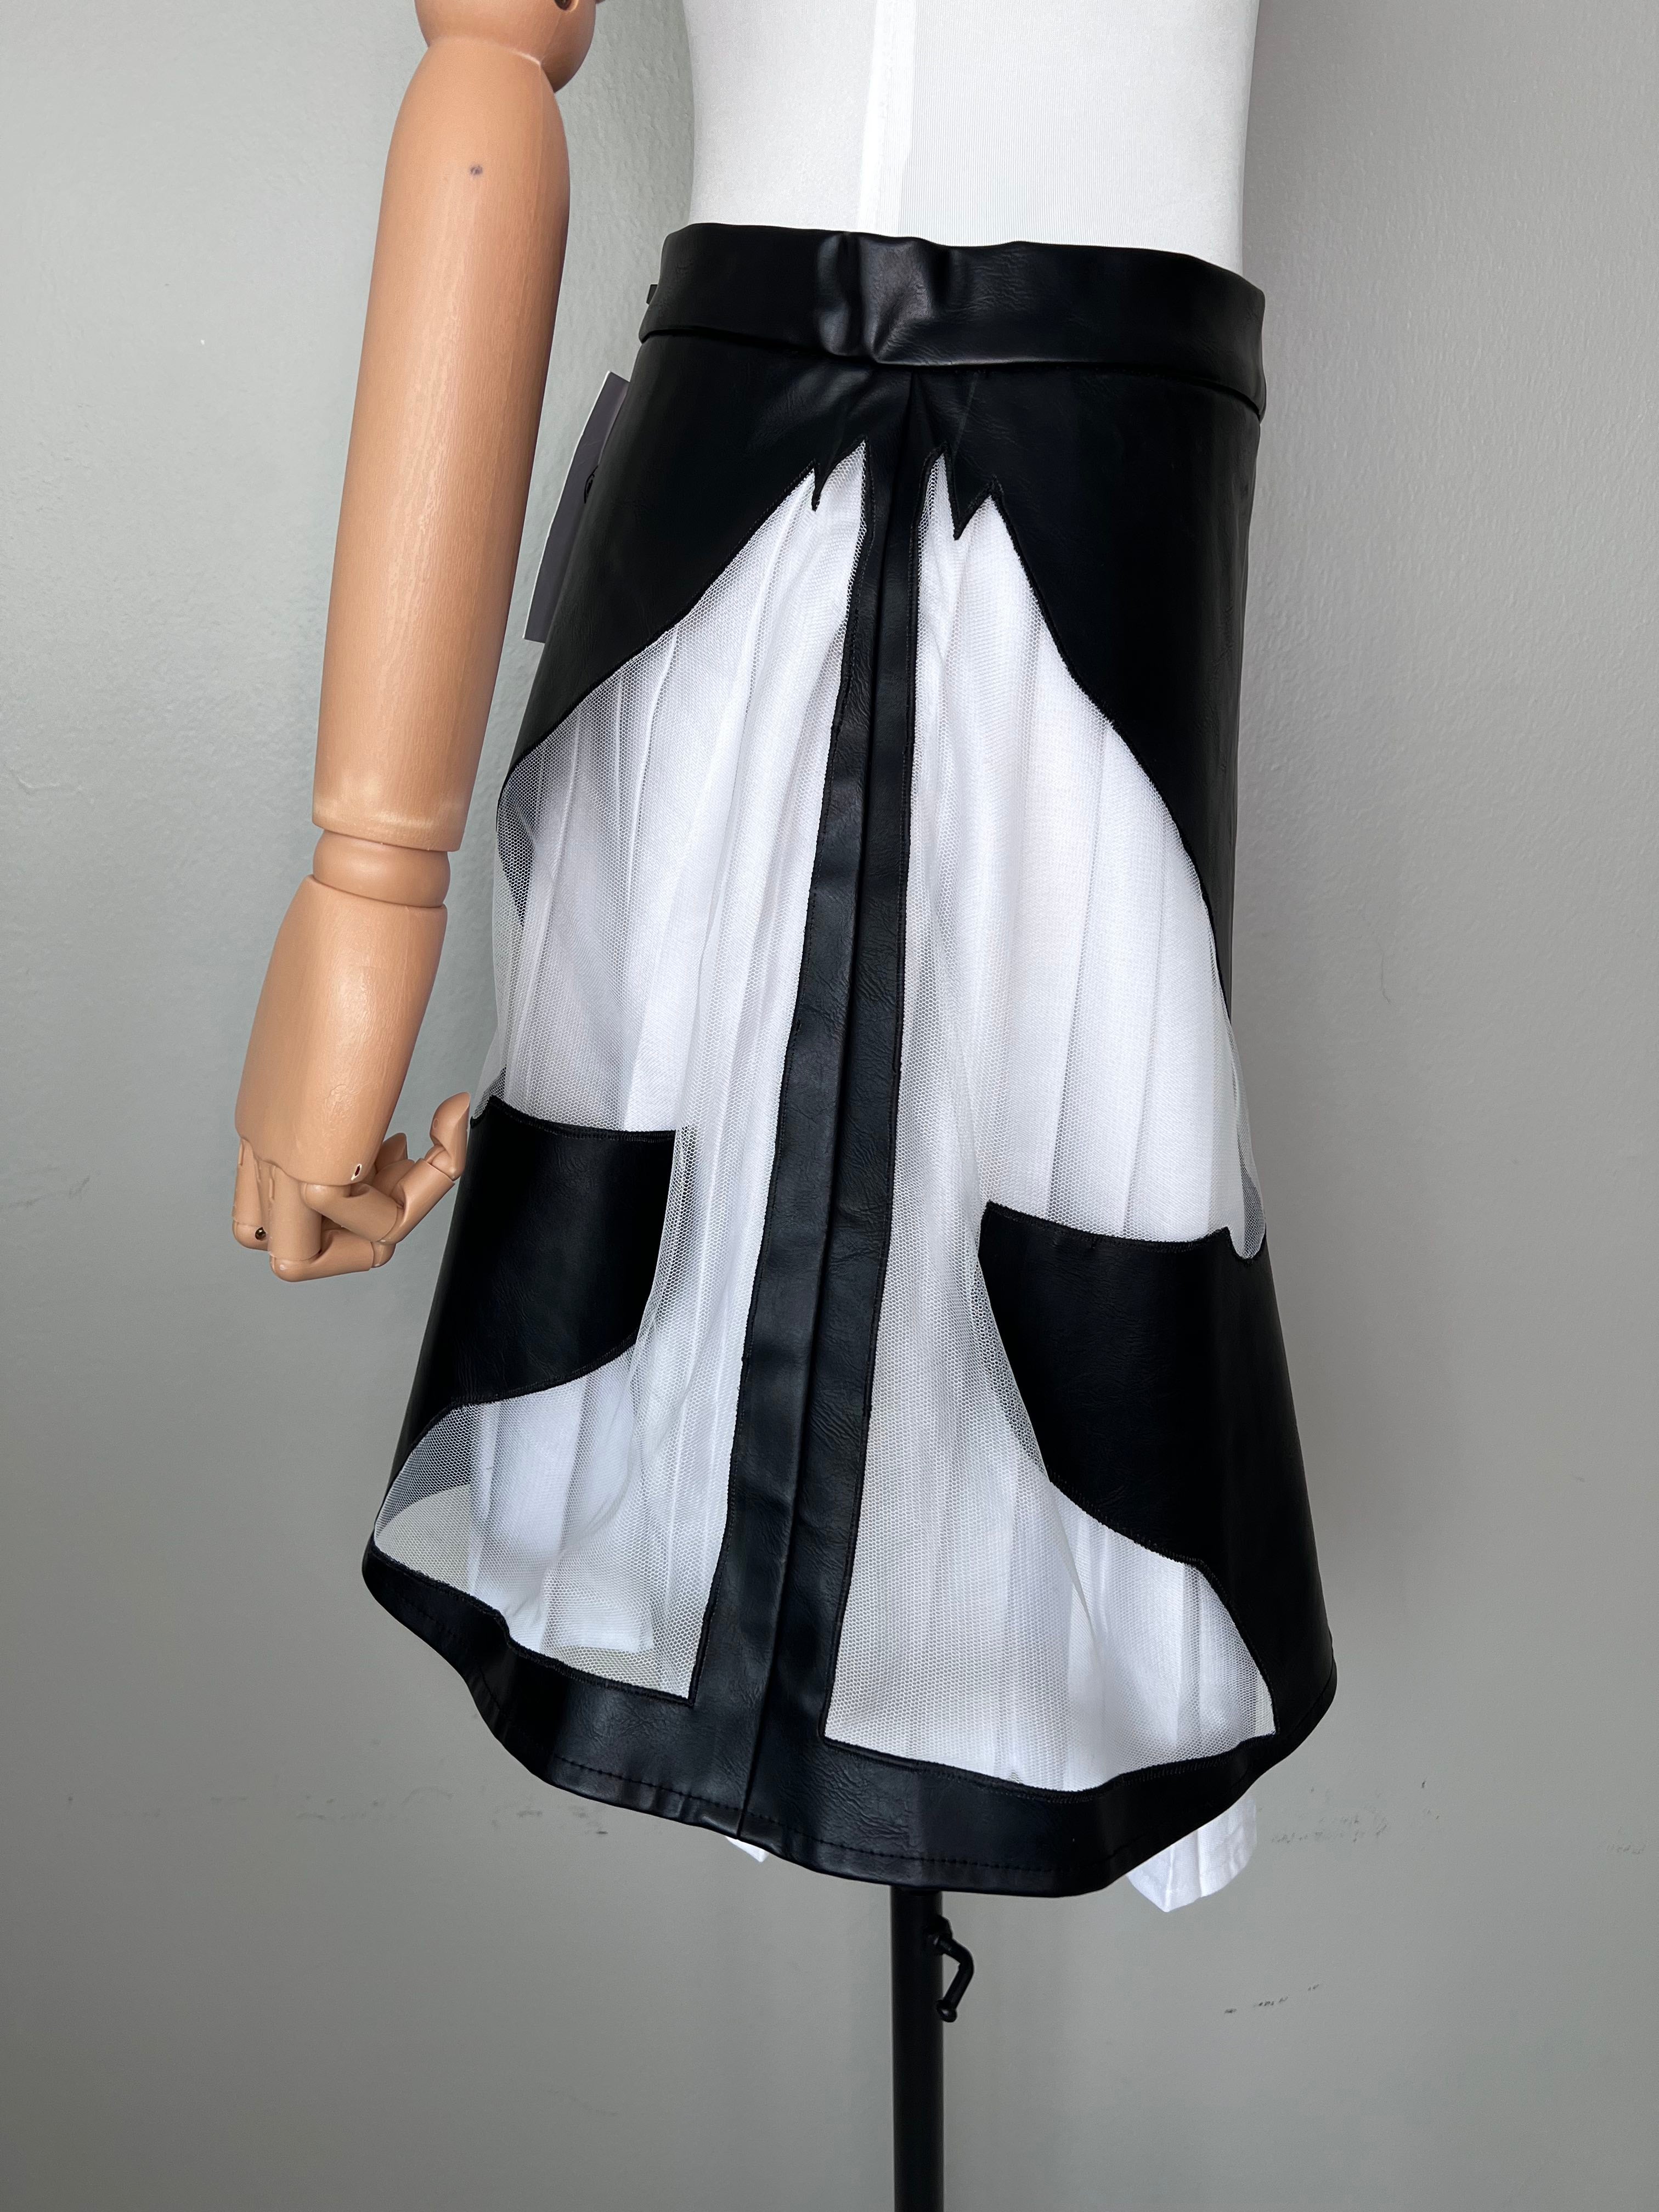 Short pleated white underskirt with leather skirt that has a horse cut out on the side. - MAMZI.